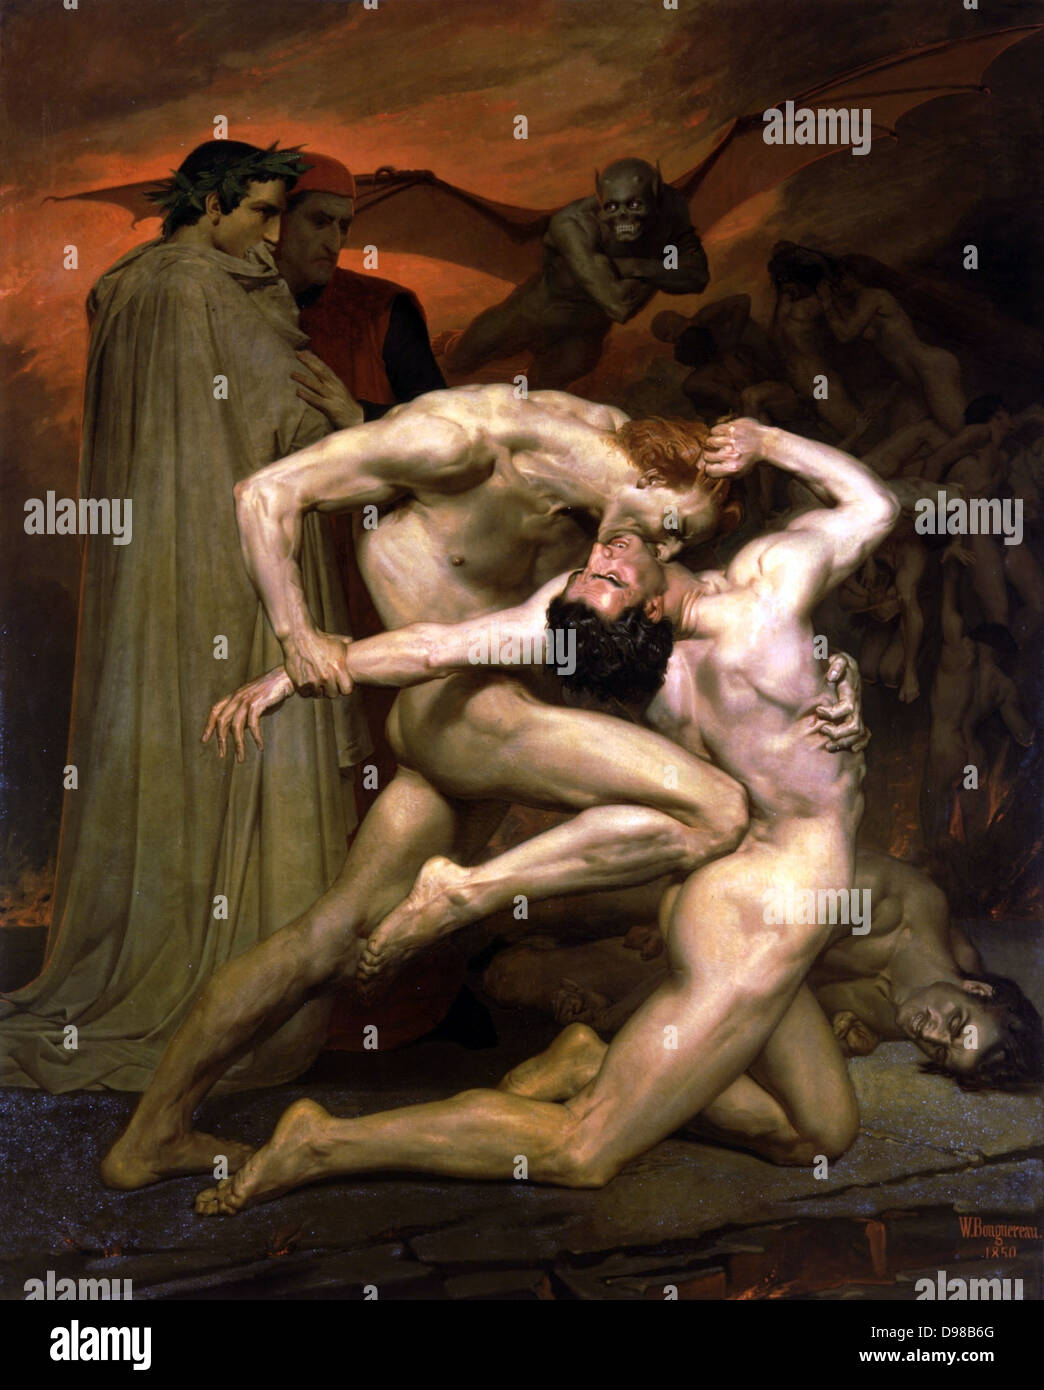 William-Adolphe Bouguereau (1825 – 1905) French academic painter Dante And Virgil In Hell 1850 Stock Photo